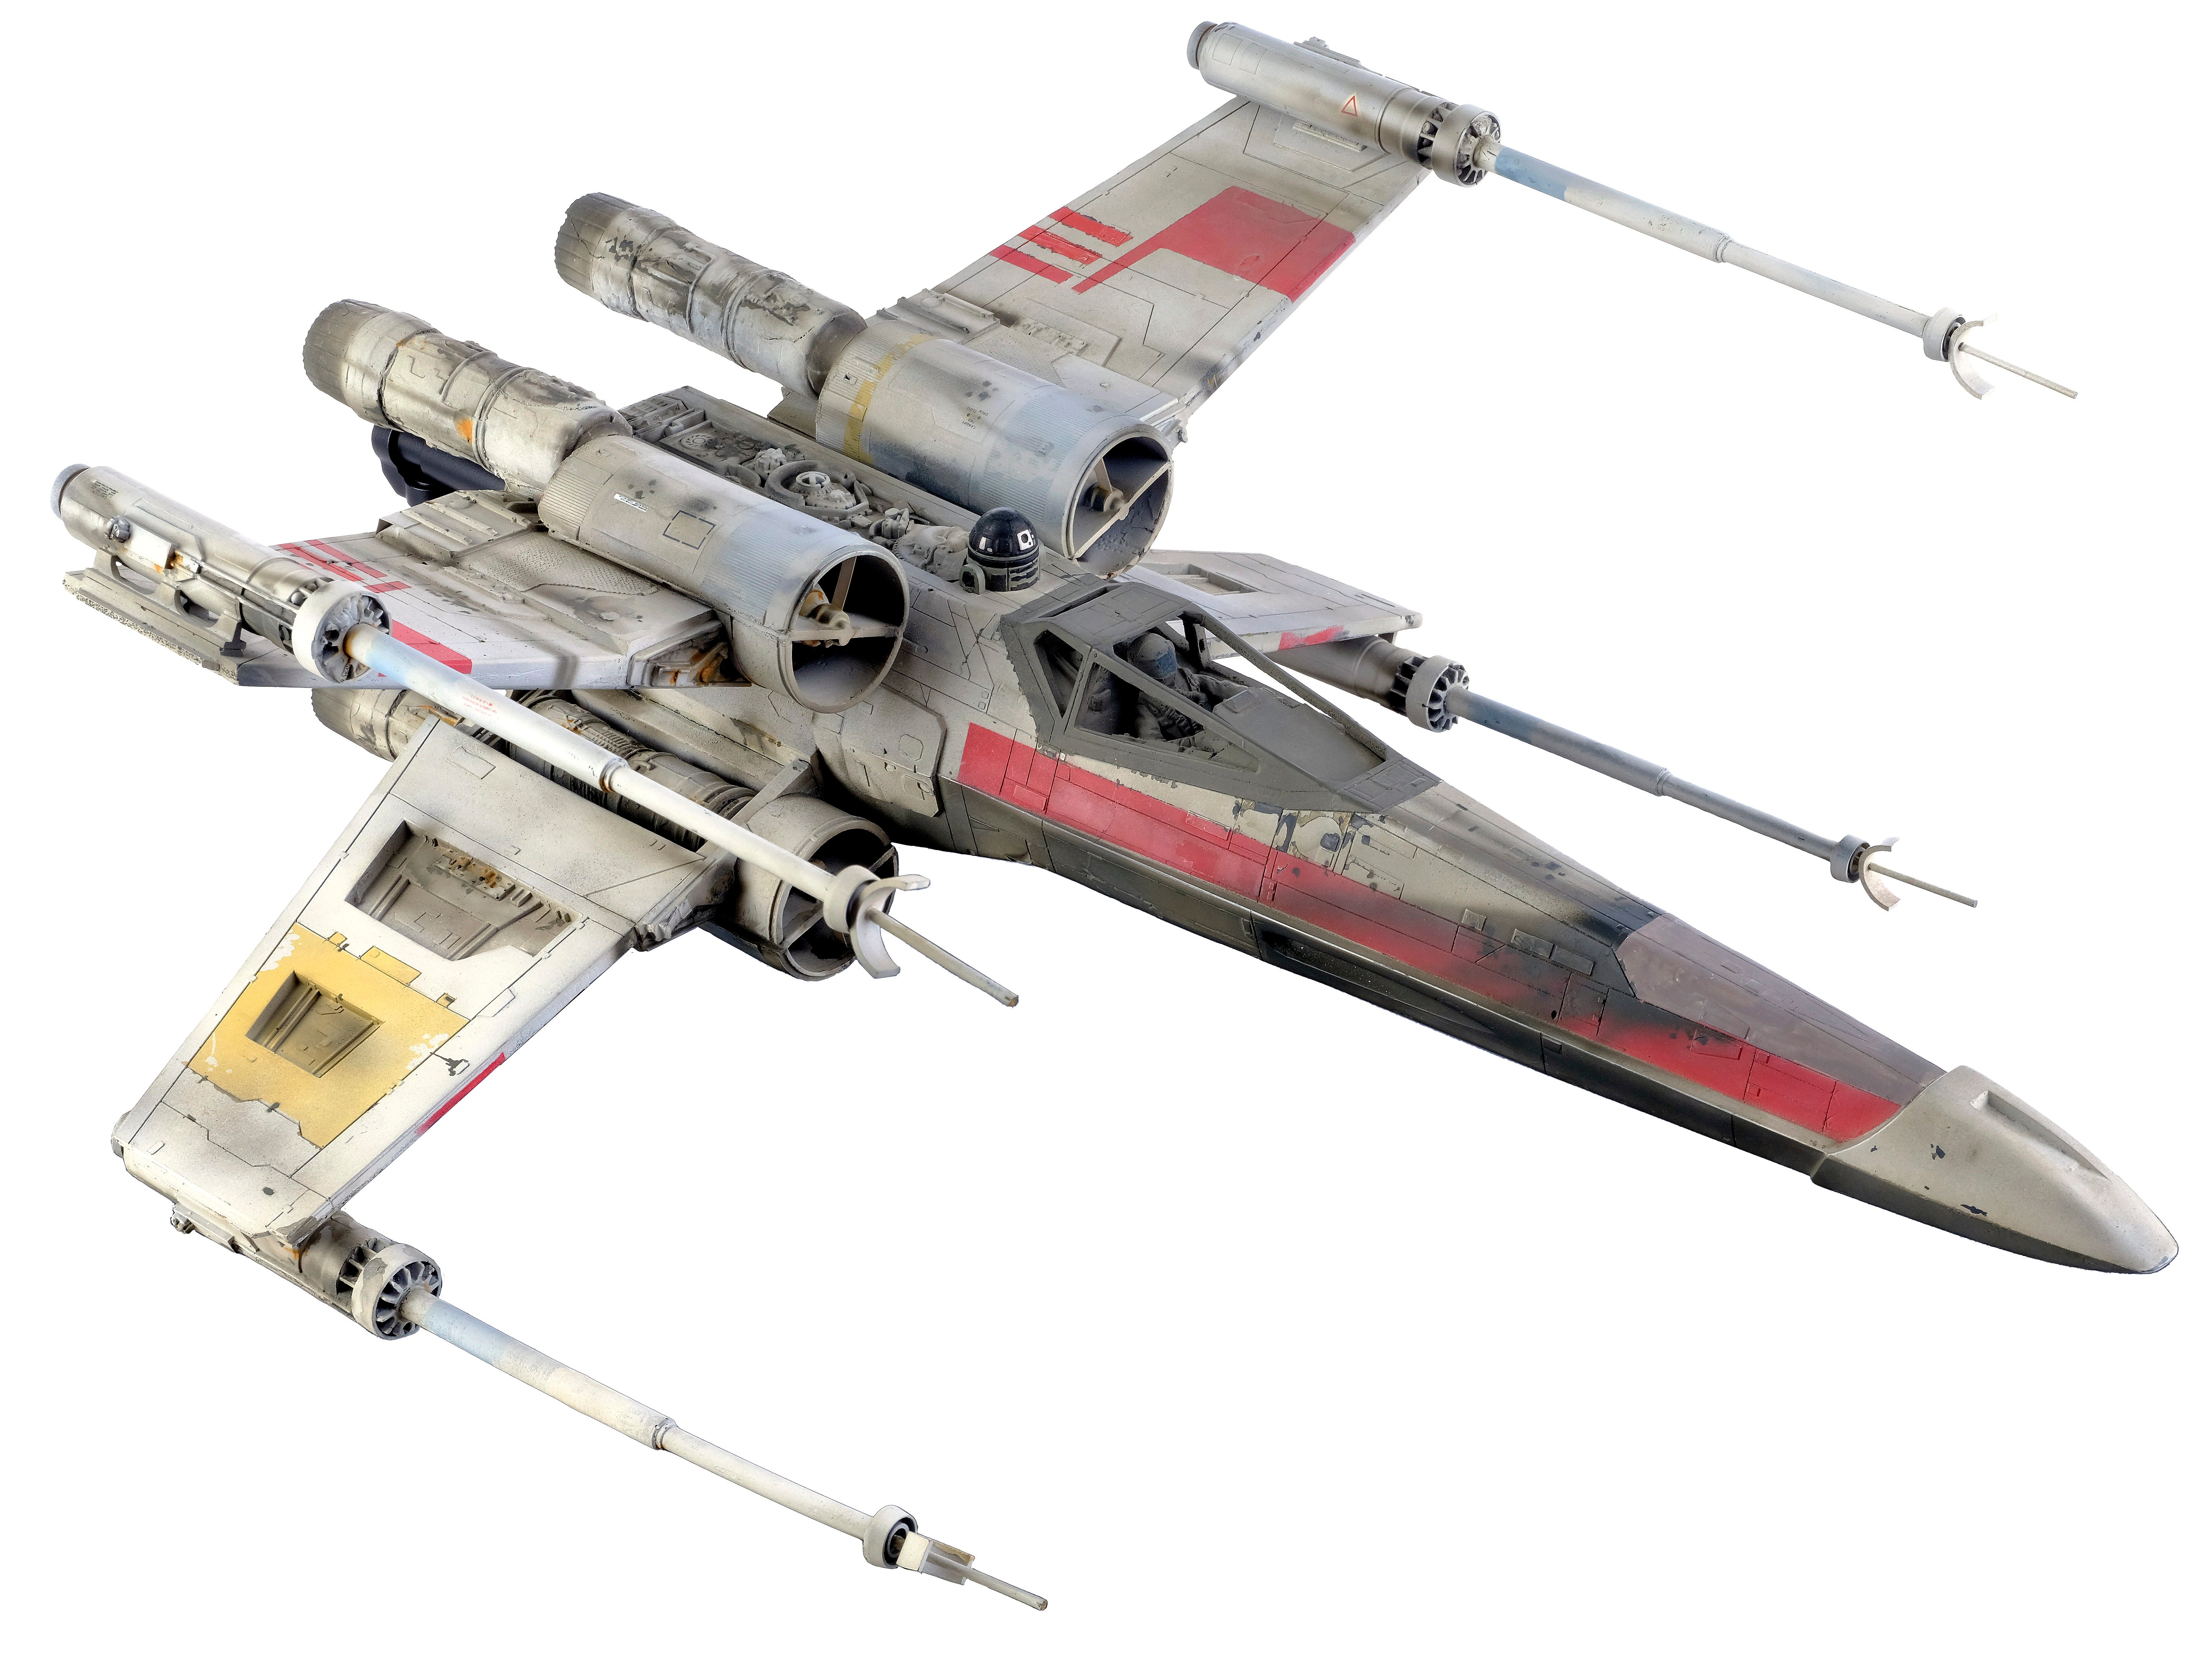 Model miniature Star Wars starfighter worth up to £800,000 to go up for auction (Popstore/PA)